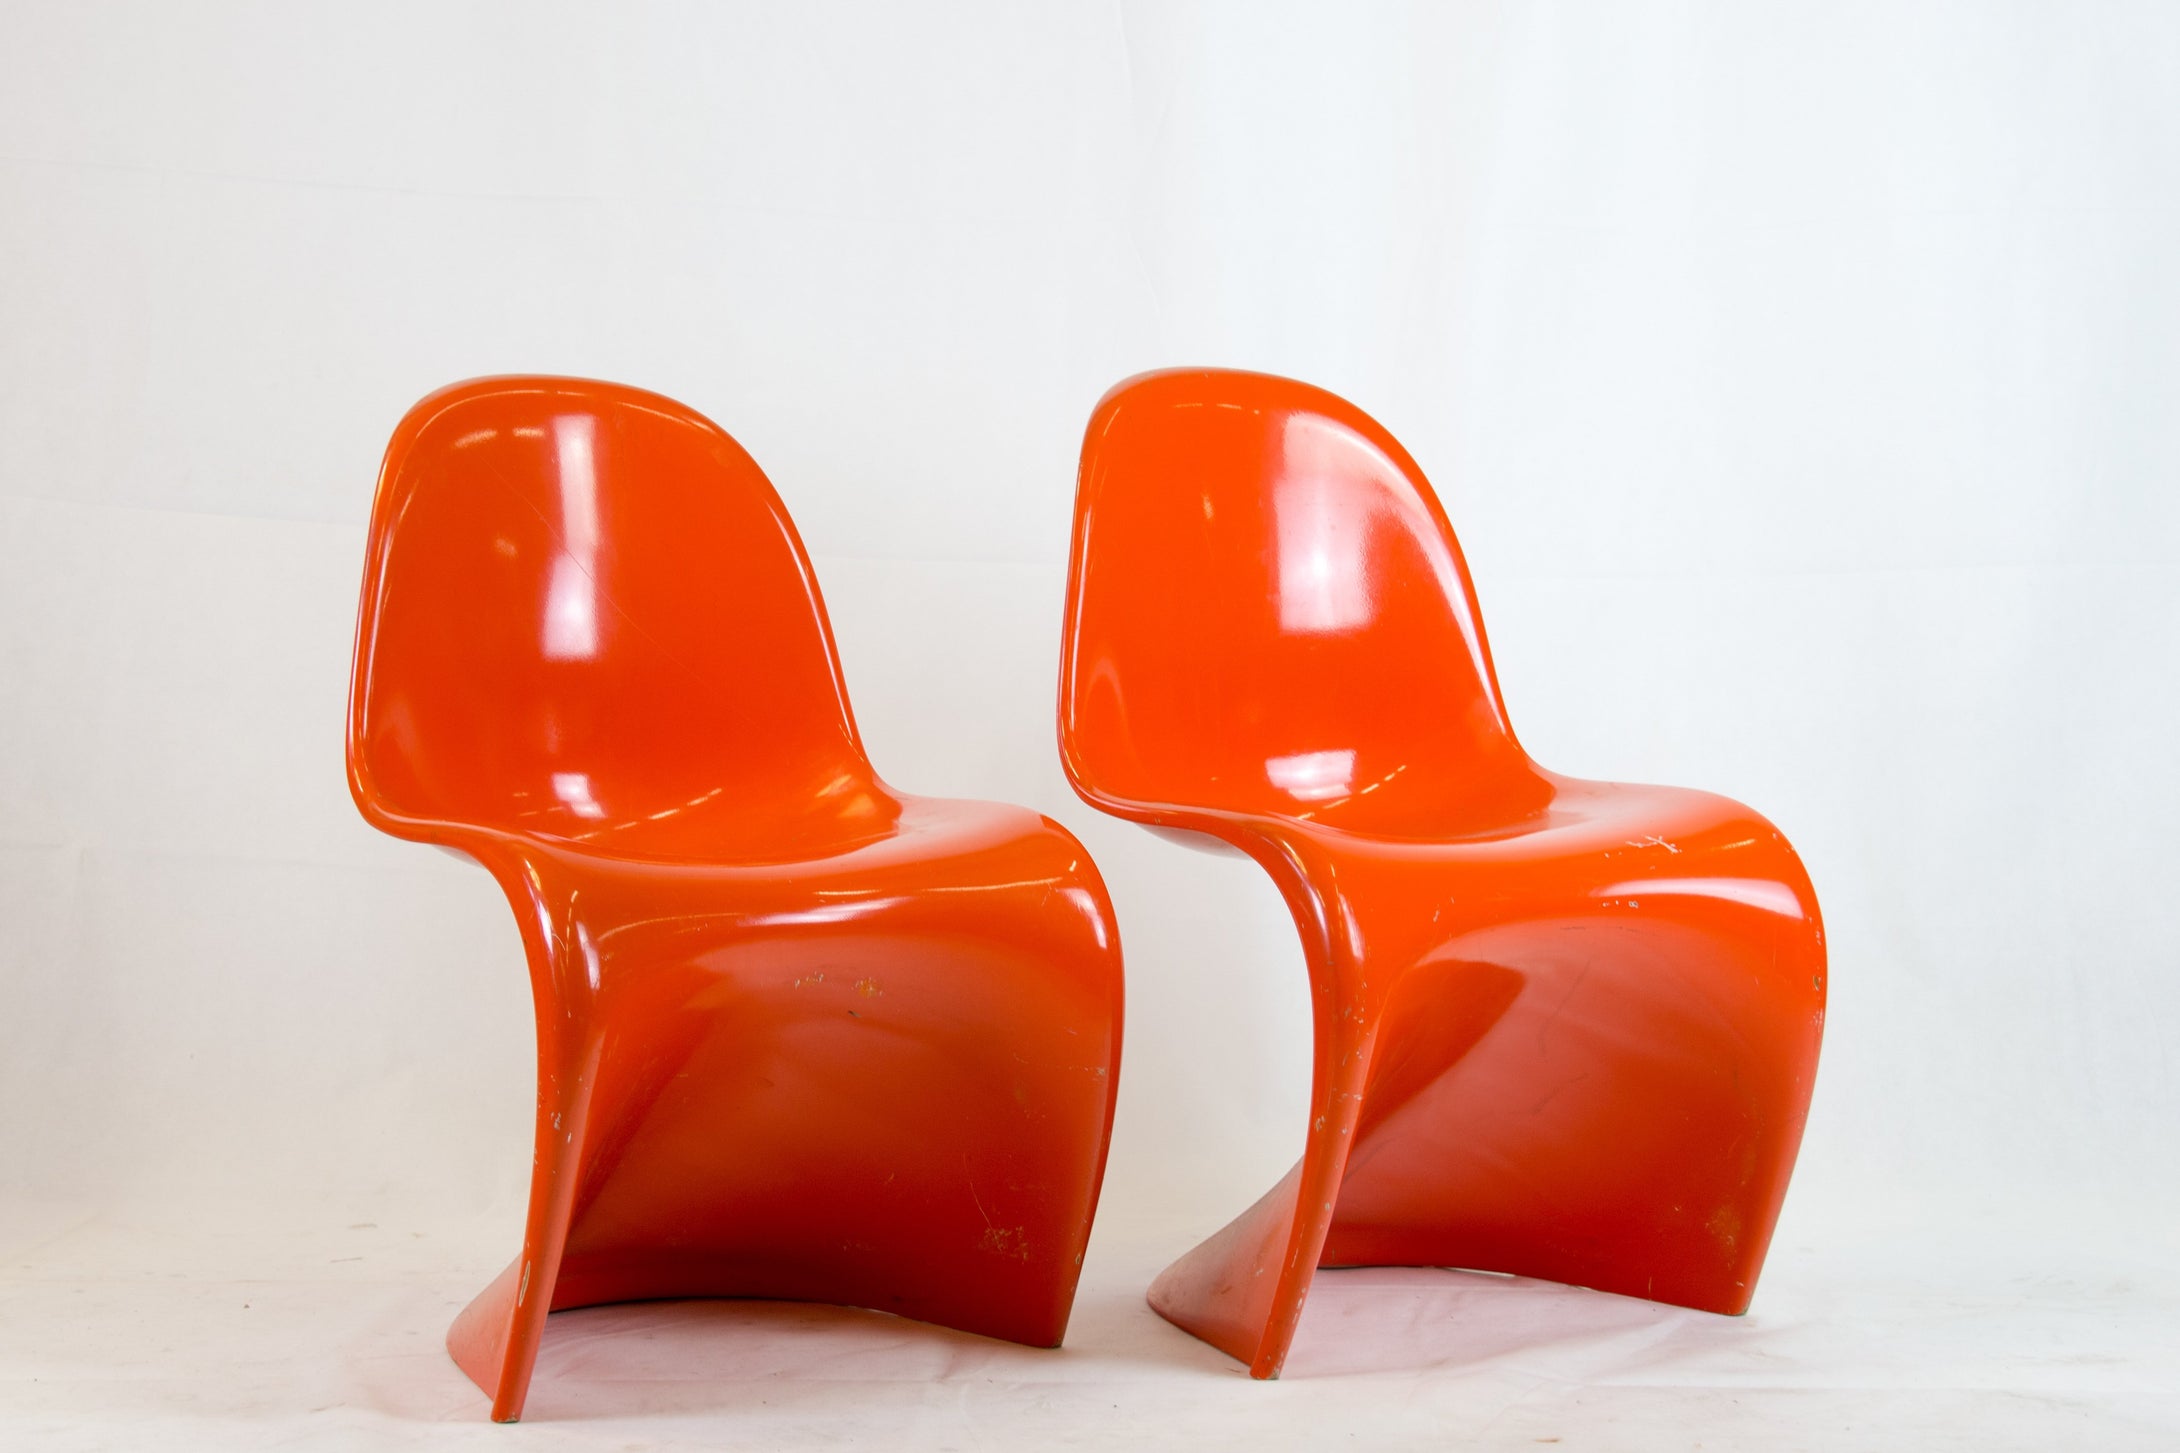 Pair of Verner Panton chairs 1st Edition